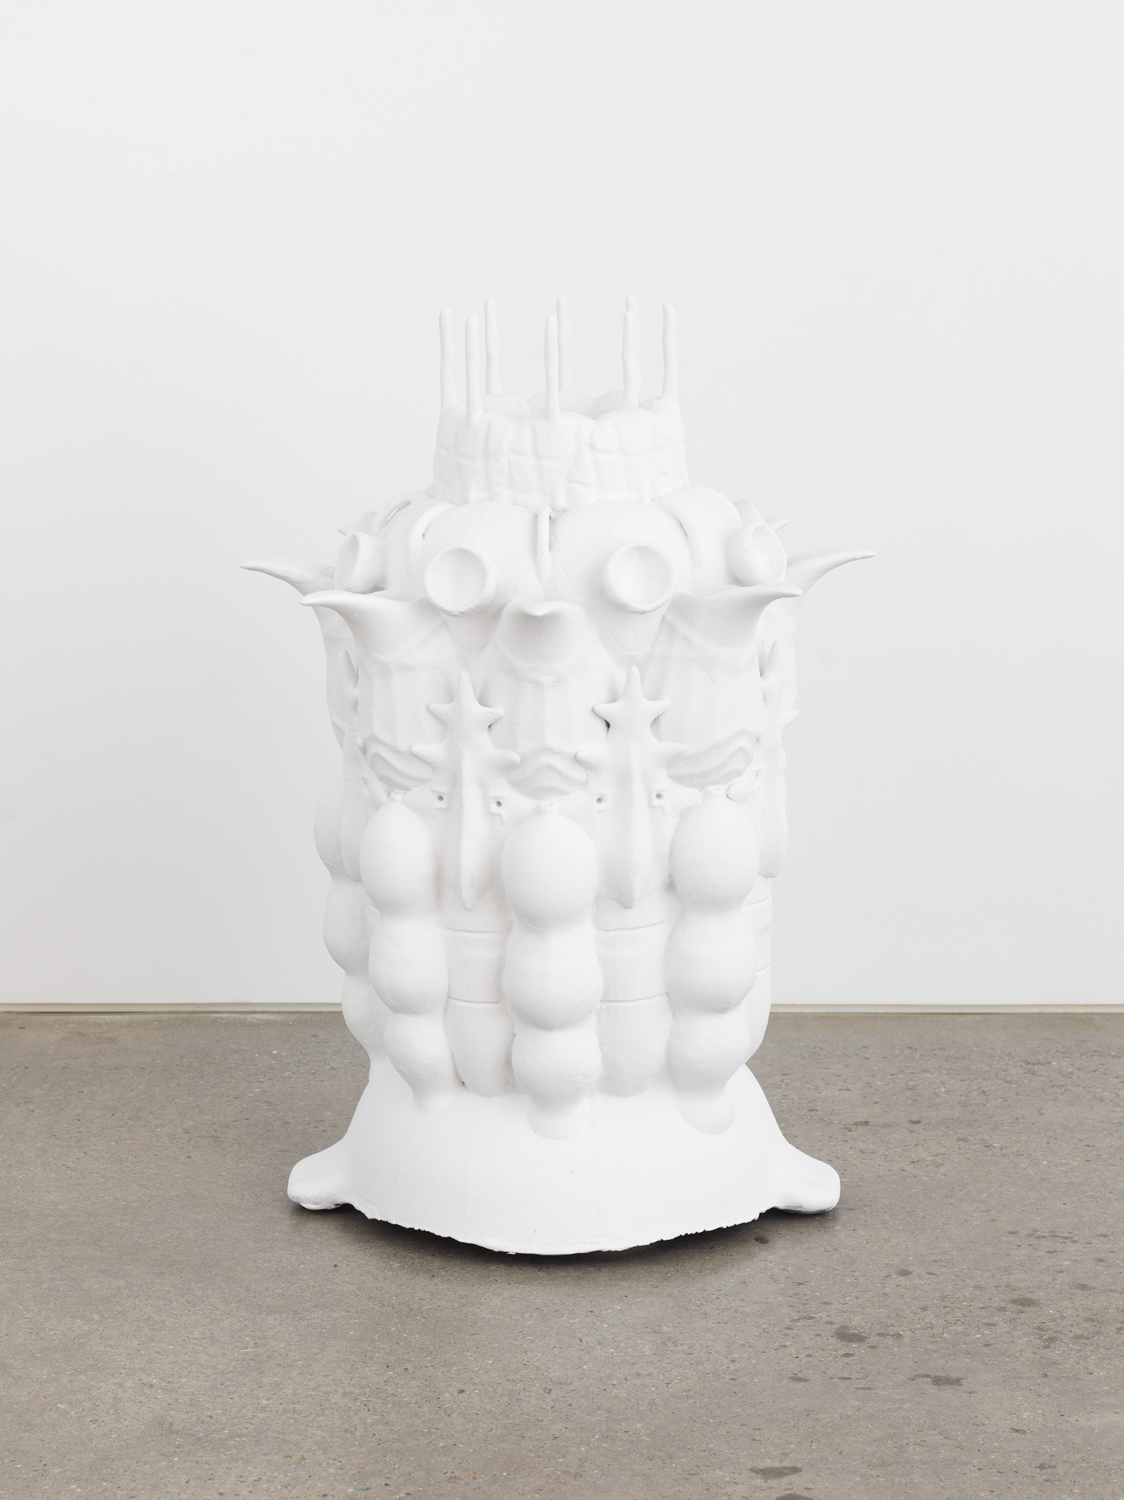 André Filipek-Magaña, Verolotemacetazadora Maguebretemaricerola, 2019, Chalk paint on epoxy-finished thermoplastic, 37.08h x 25.37w x 24.02d in.